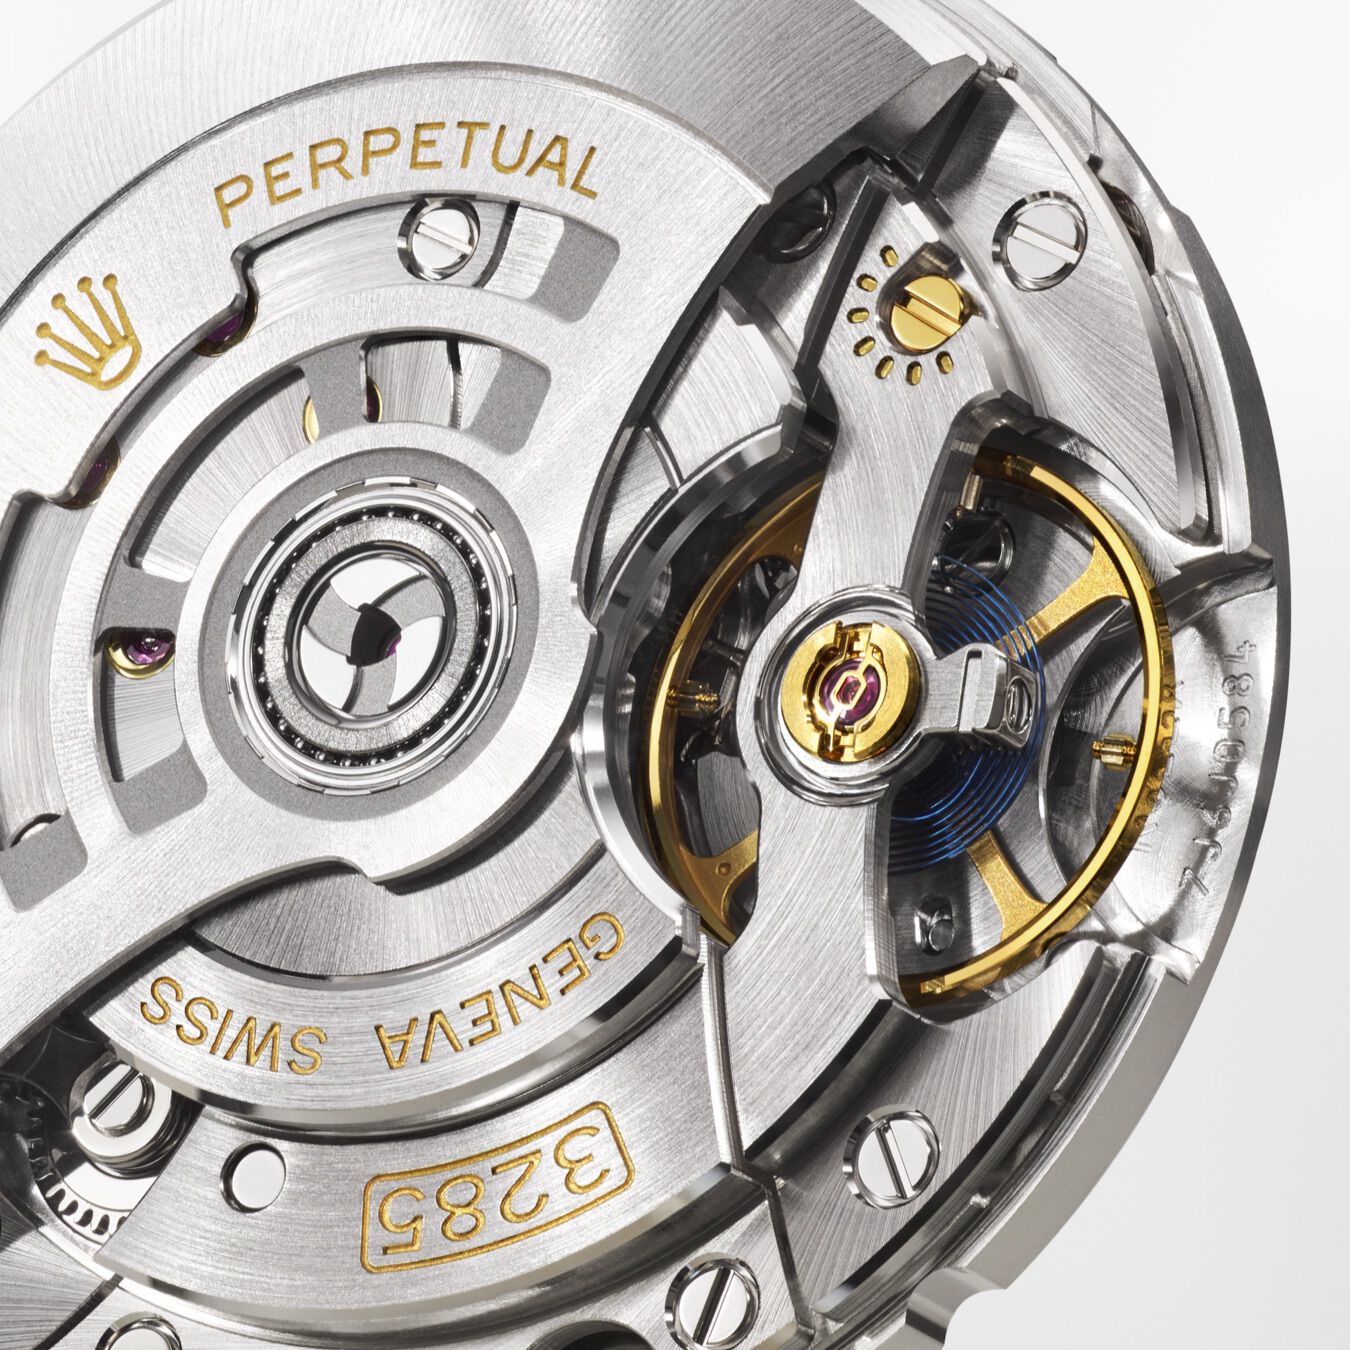 Close-up of the Rolex calibre 3285 perpetual mechanical watch movement. 